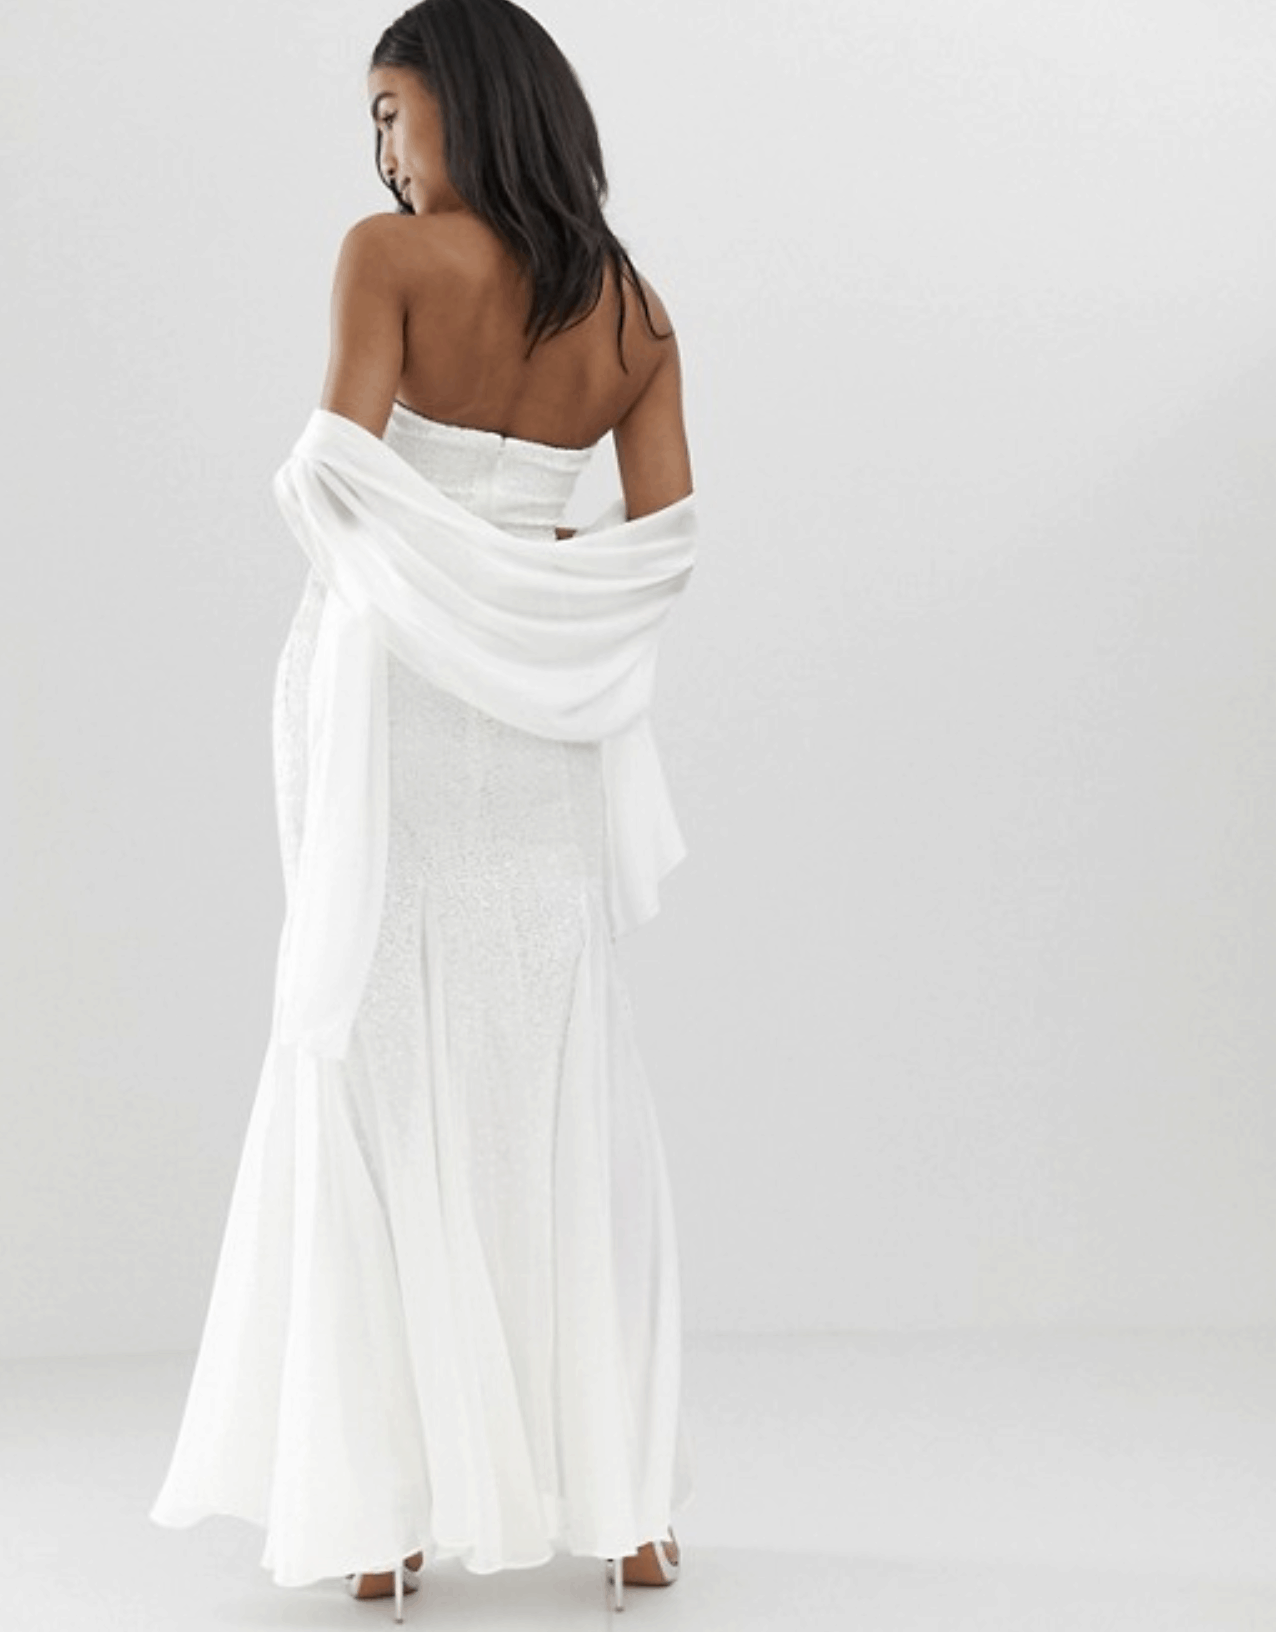 Cheap Affordable Bridal Gowns and Wedding Dress City Goddess Bridal Bandeau Fishtail Maxi Dresses